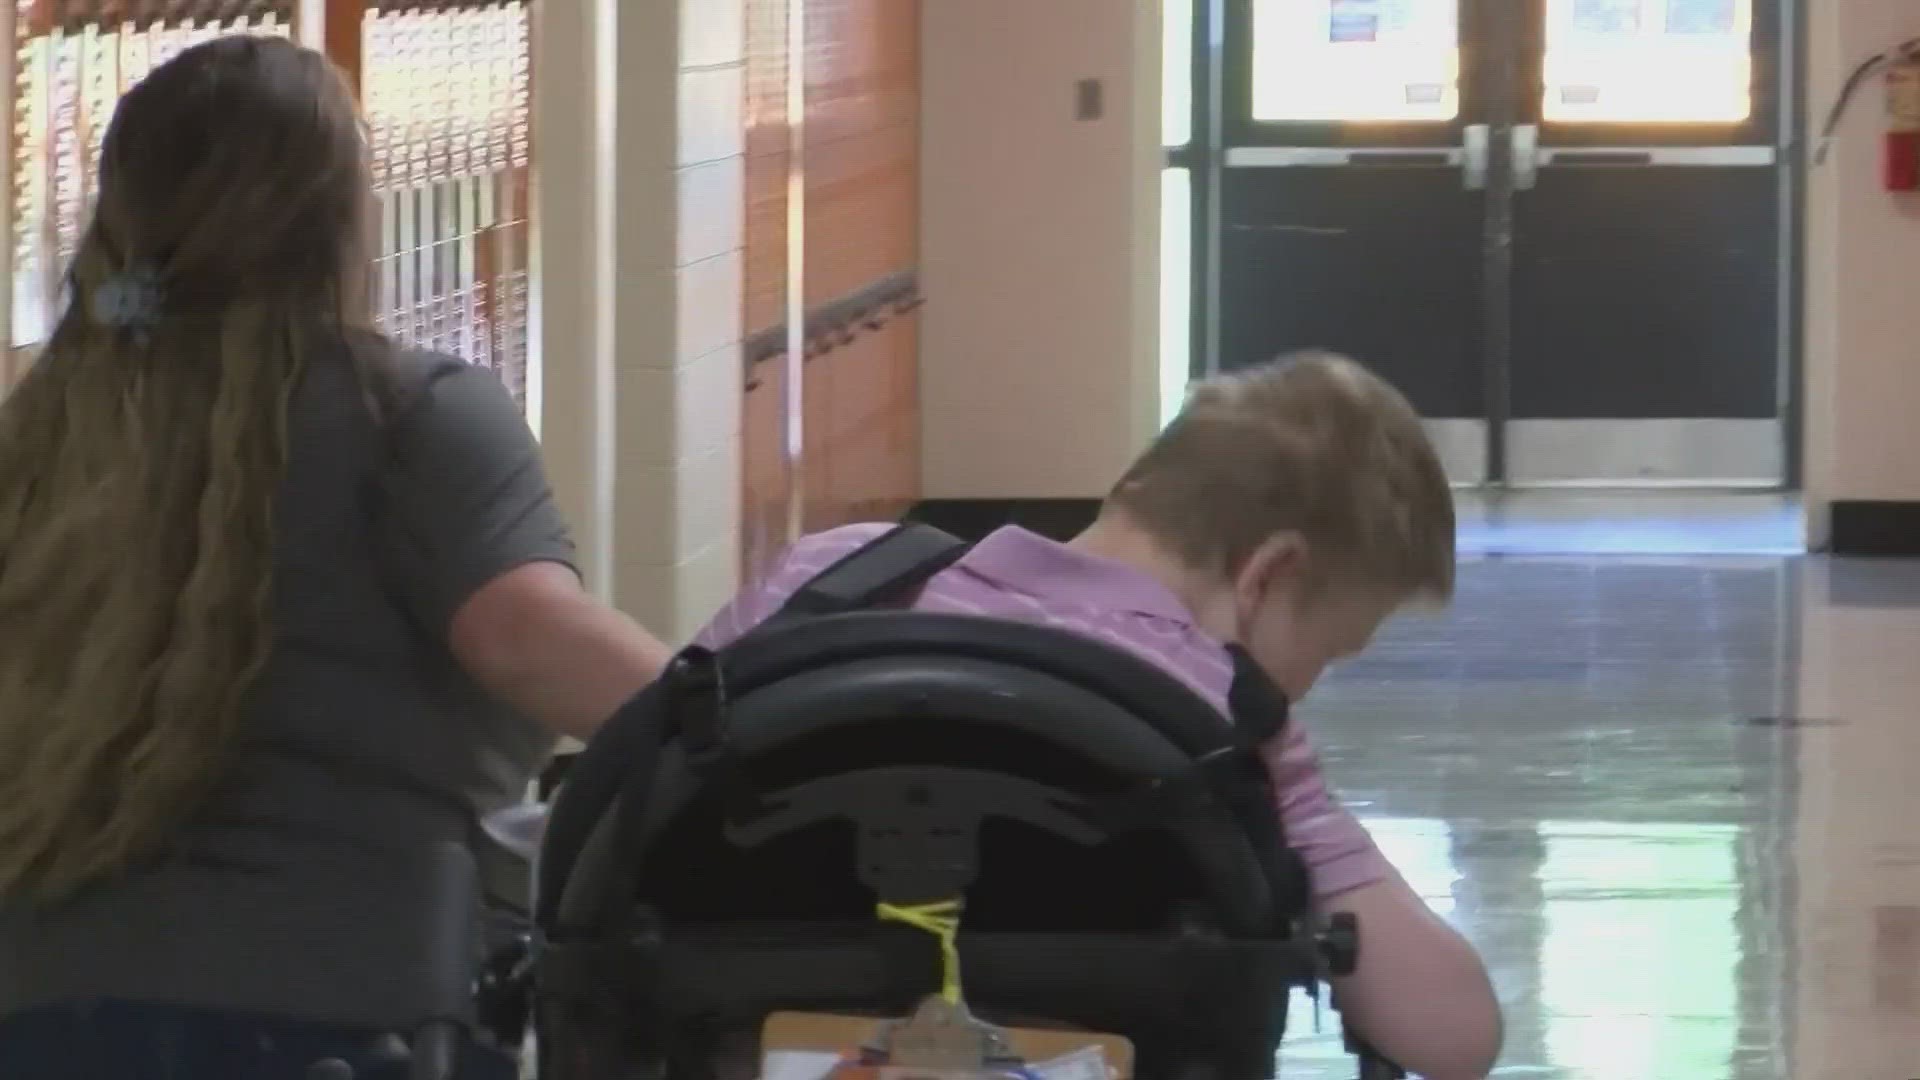 For nearly two years, a student has gotten a "speeding ticket" by running through the halls of their school